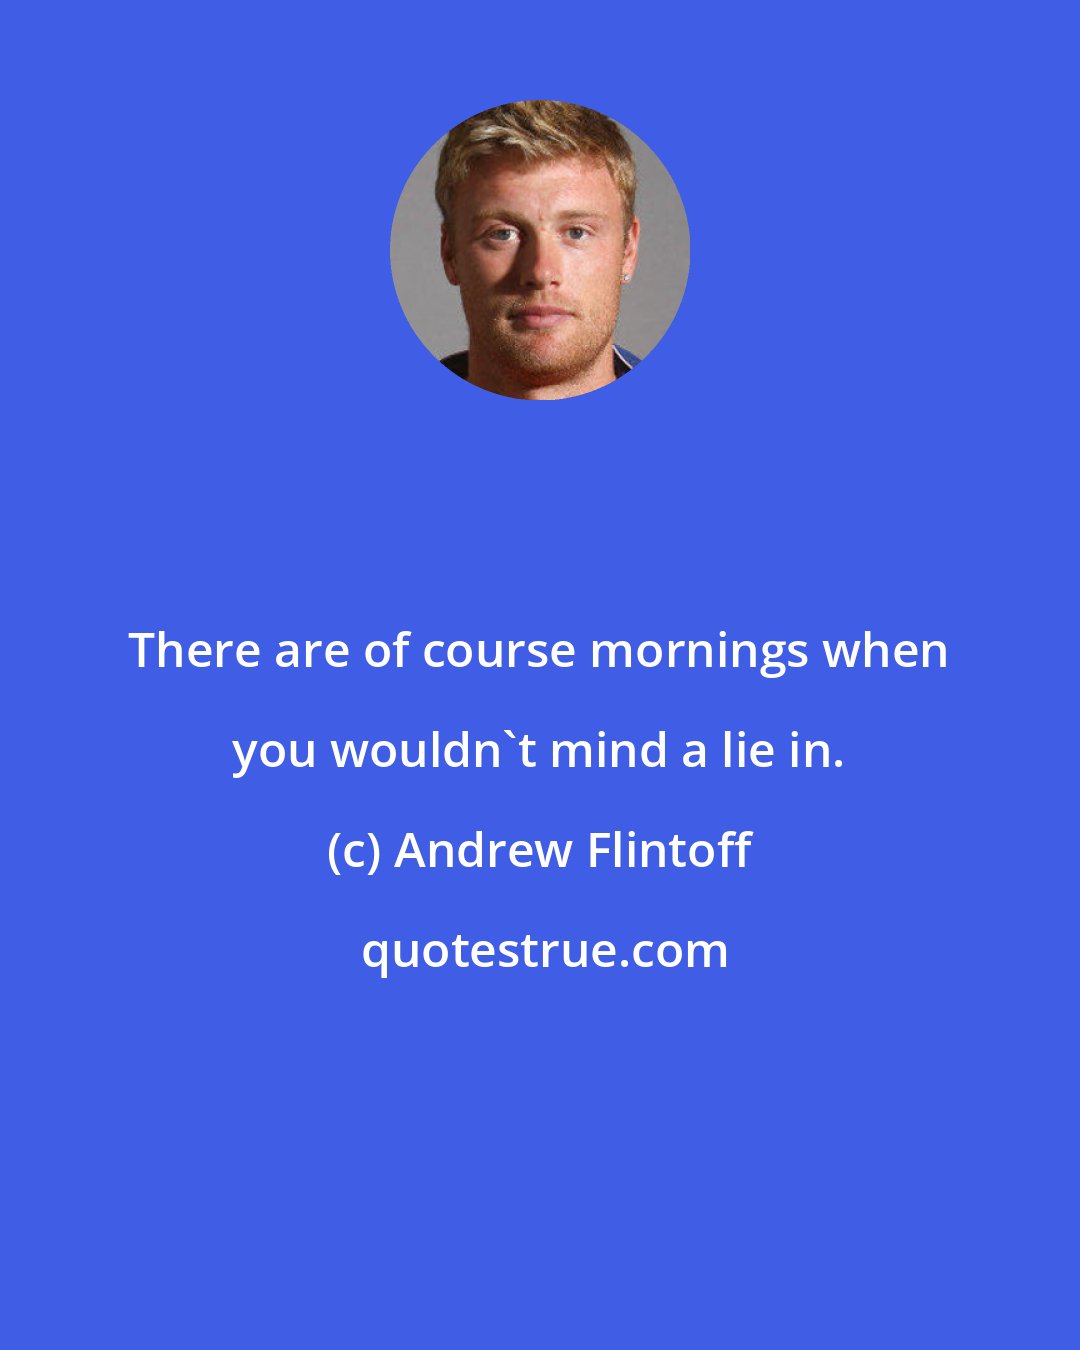 Andrew Flintoff: There are of course mornings when you wouldn't mind a lie in.